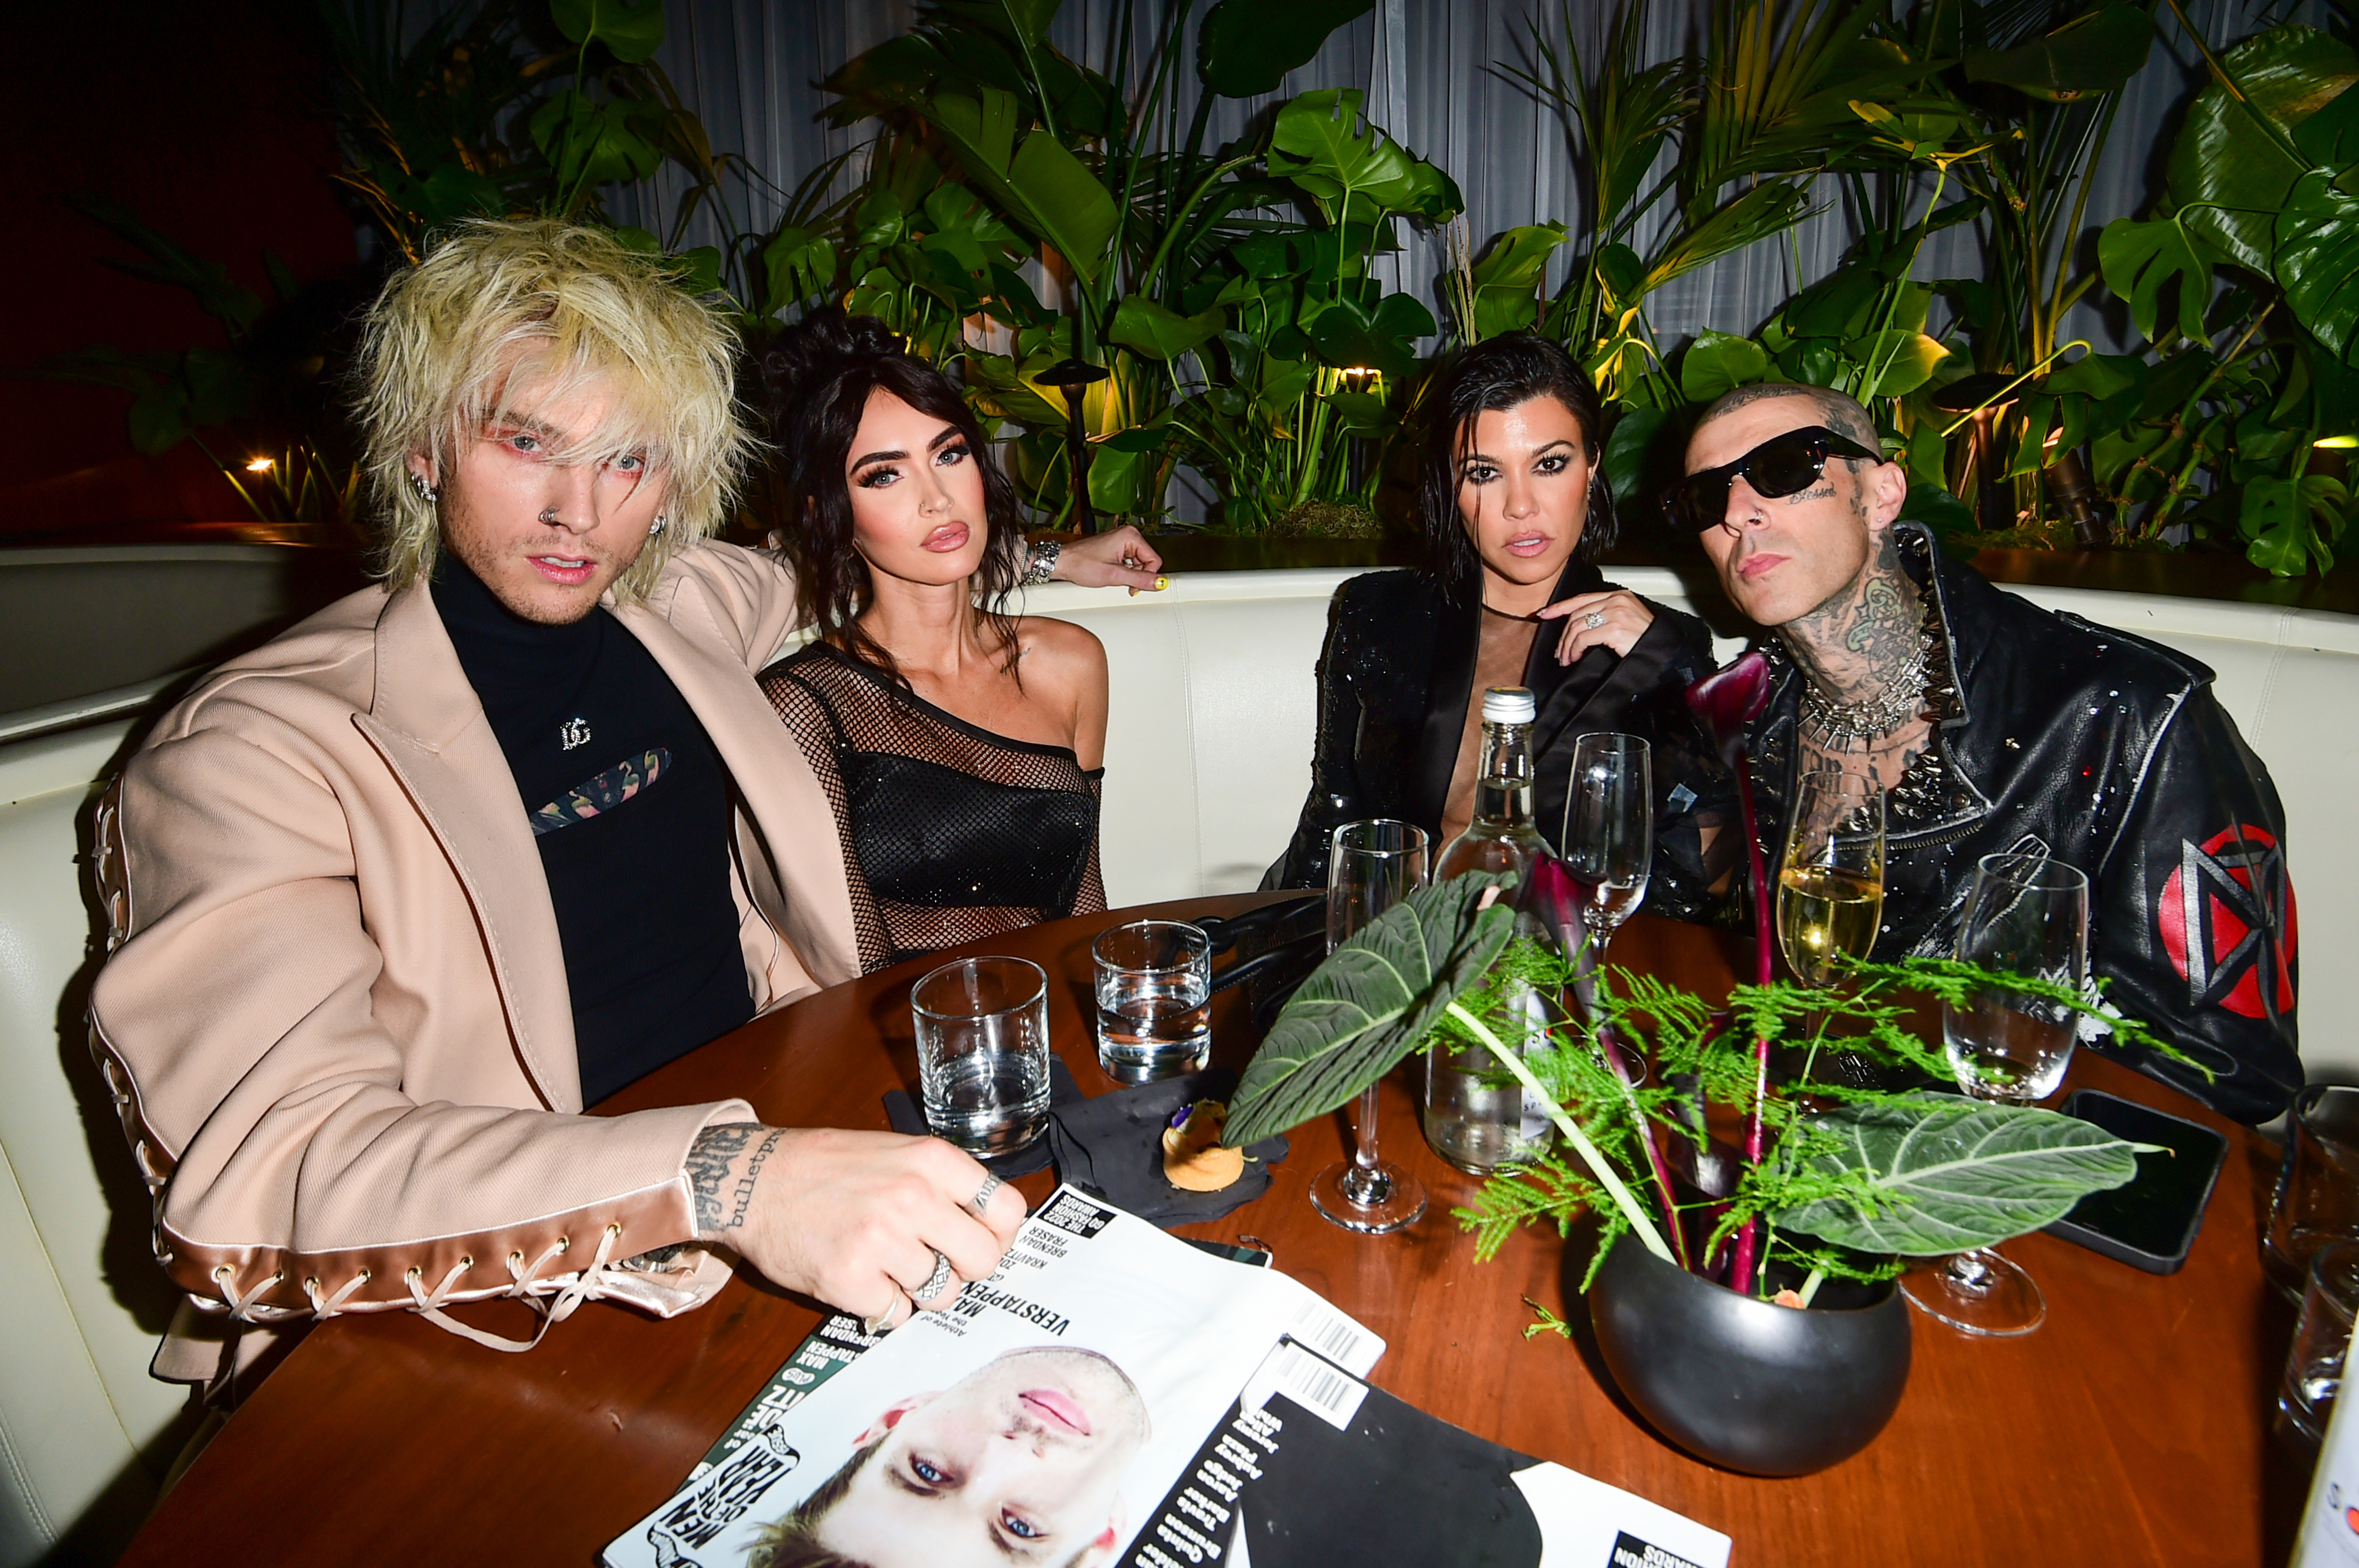 Kourtney and Travis seated at a table with MGK and Megan Fox